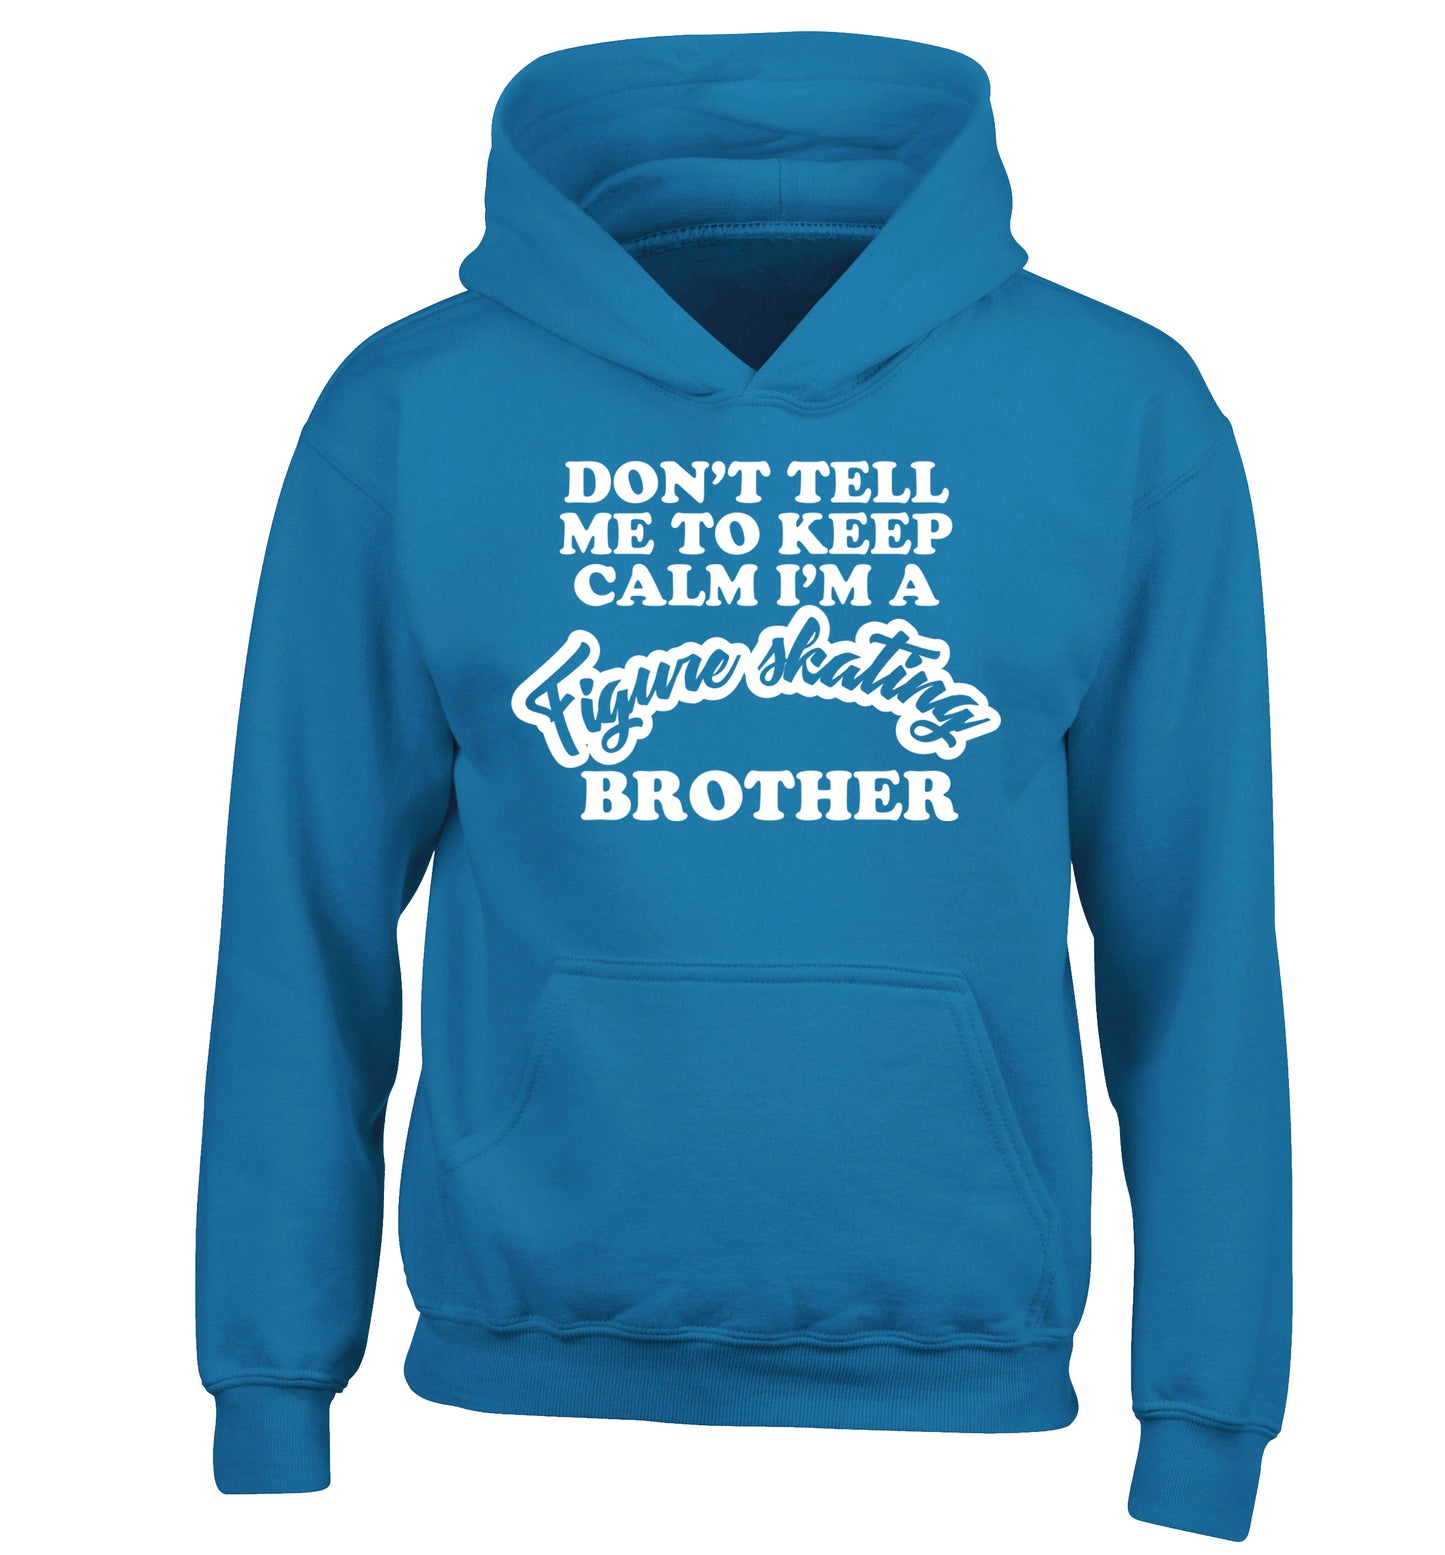 Don't tell me to keep calm I'm a figure skating brother children's blue hoodie 12-14 Years